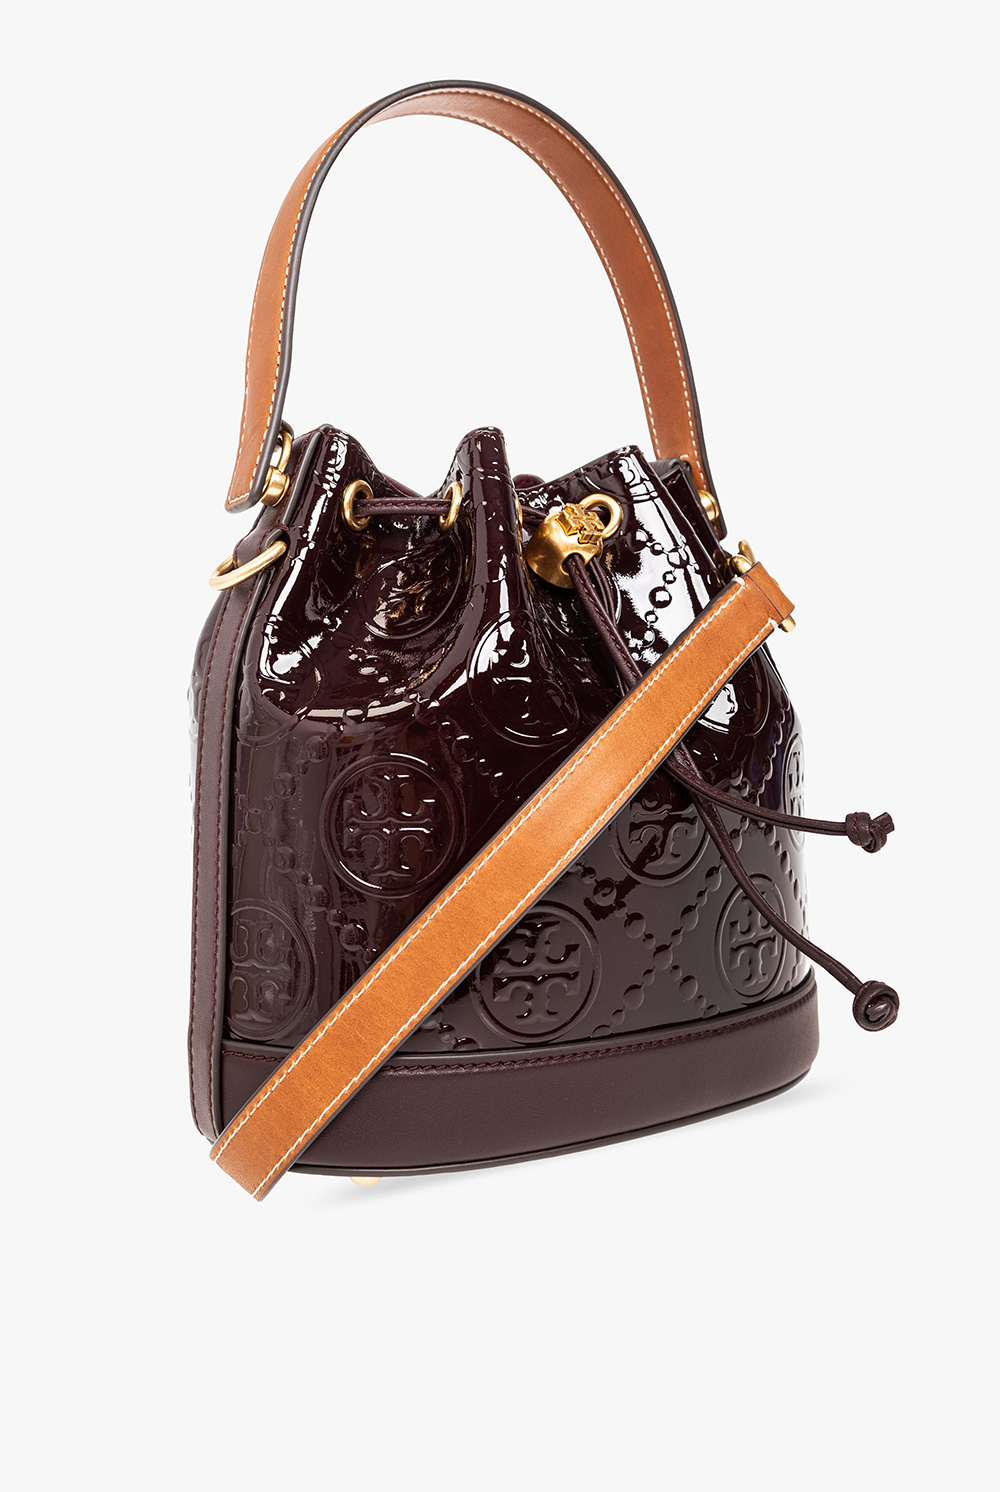 Tory Burch Bucket bag in patent leather